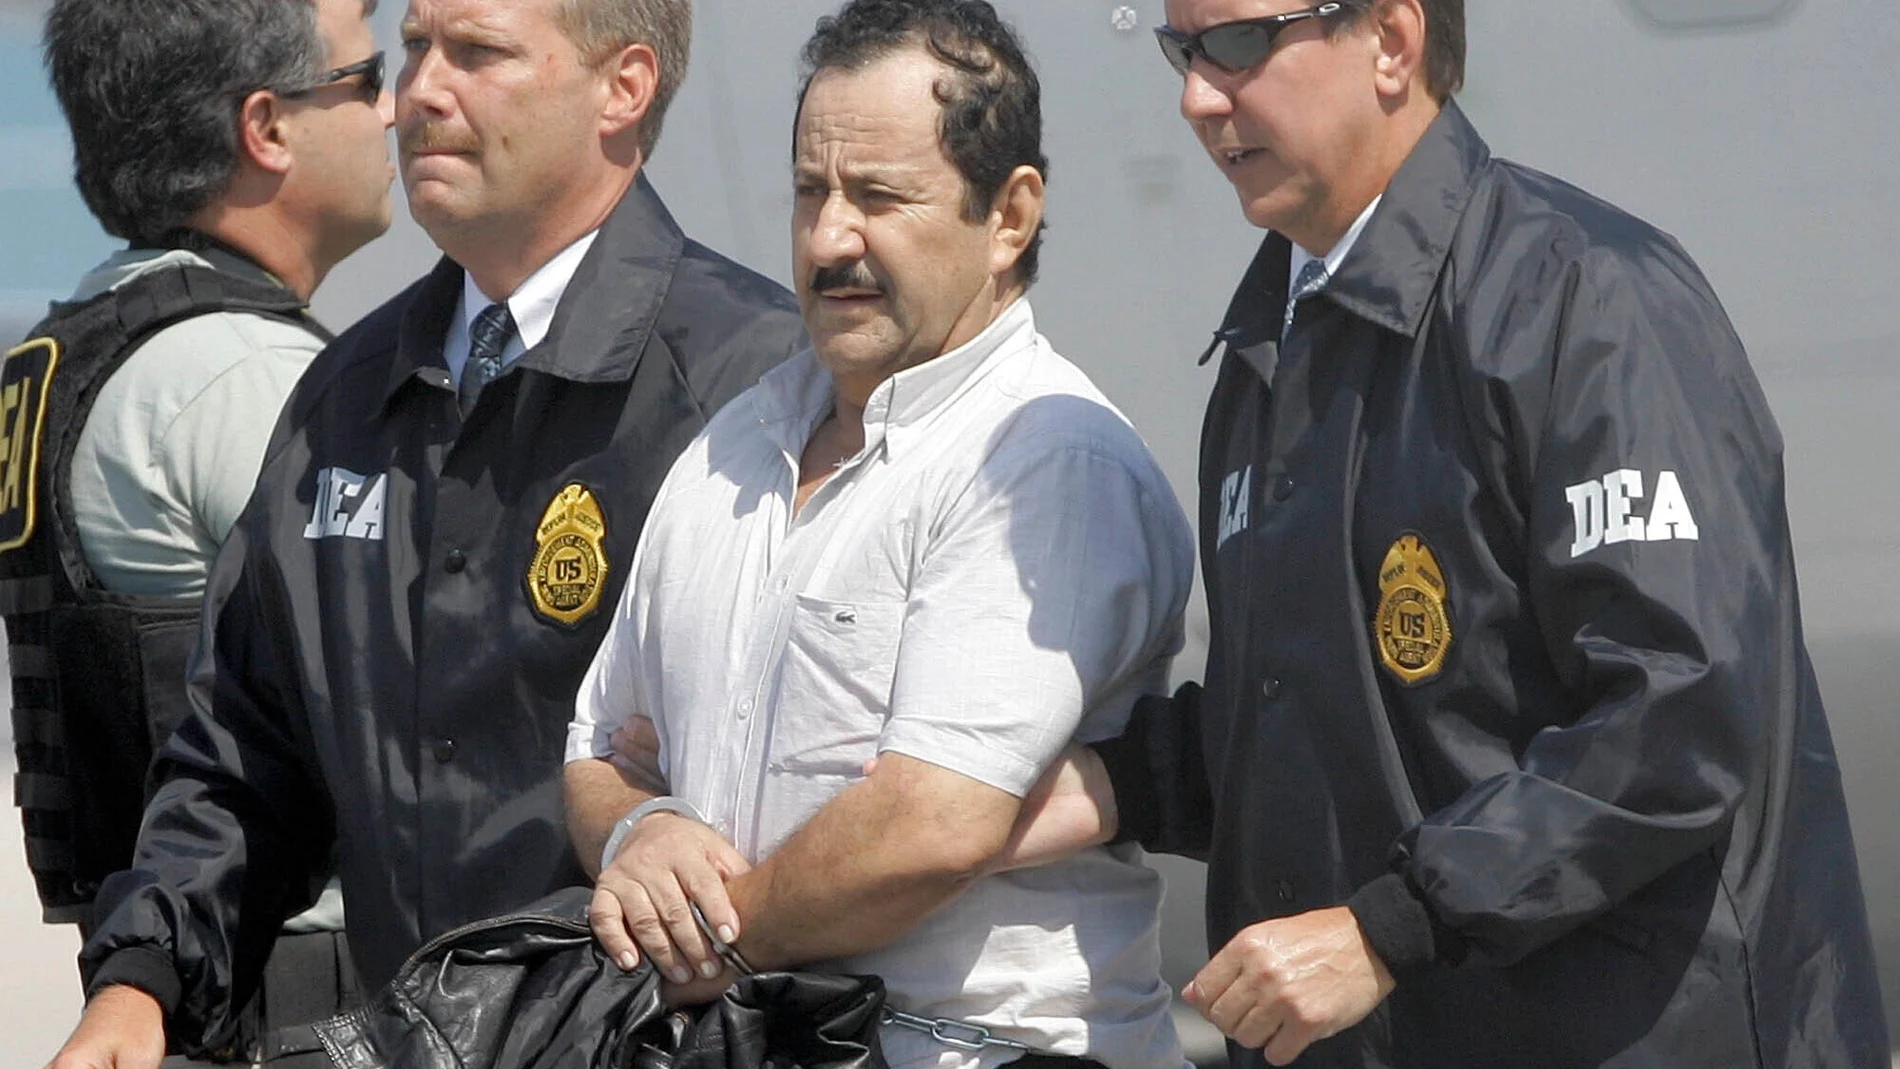 FILE - In this May 13, 2008 file photo, Colombian paramilitary Hernan Giraldo Serna, second right, is escorted by U.S. DEA Agents at his arrival in Opa-locka, Fla. Giraldo Serna has been deported from the US and returned to Colombian on Monday, January 25, 2021, after finishing a 16-year sentence in a U.S. prison for drug trafficking earlier this month. (AP Photo/Alan Diaz, File)